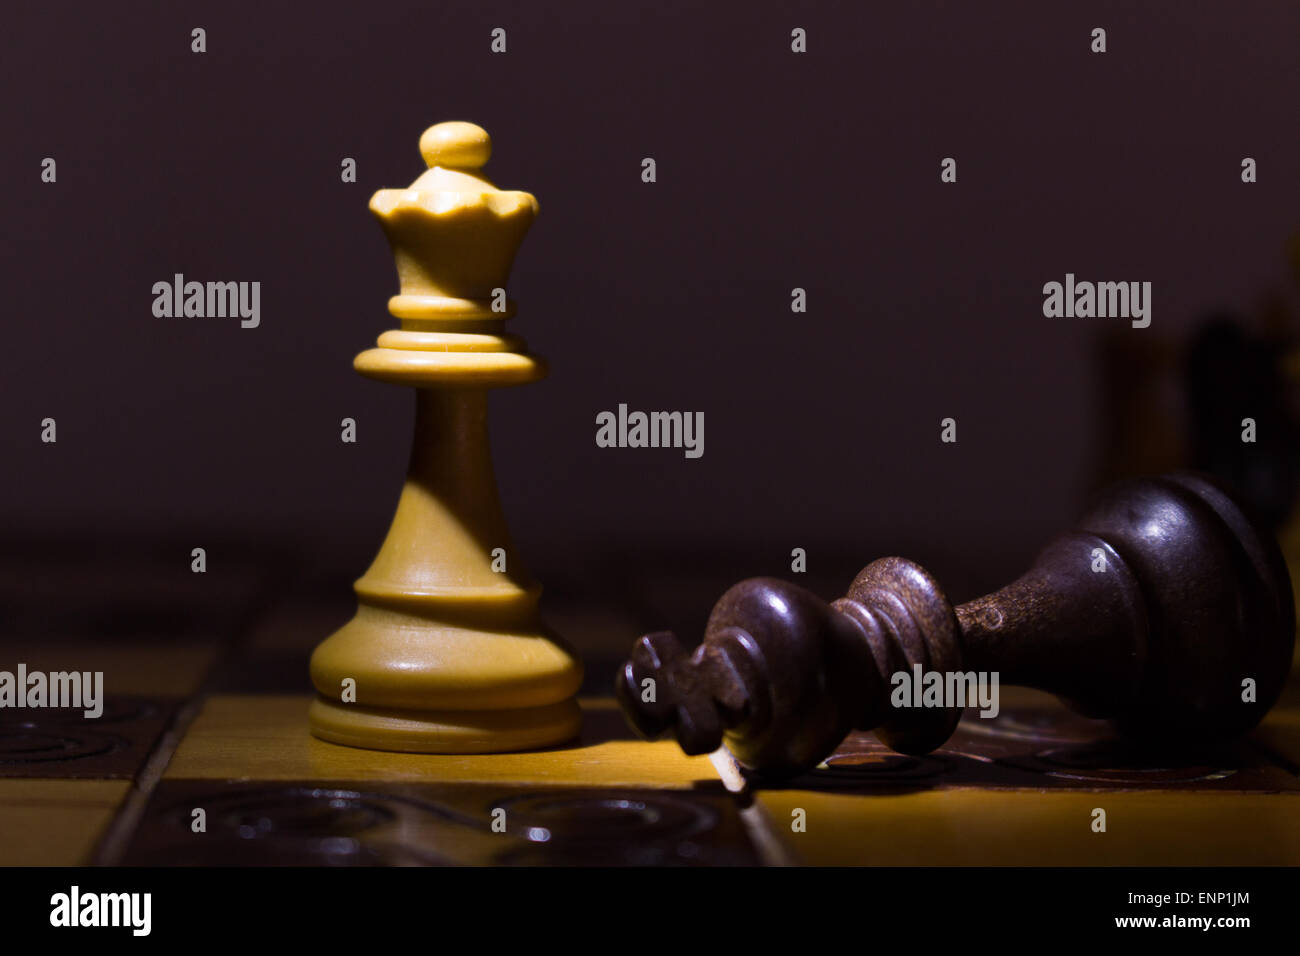 Photographed on a chess board Stock Photo